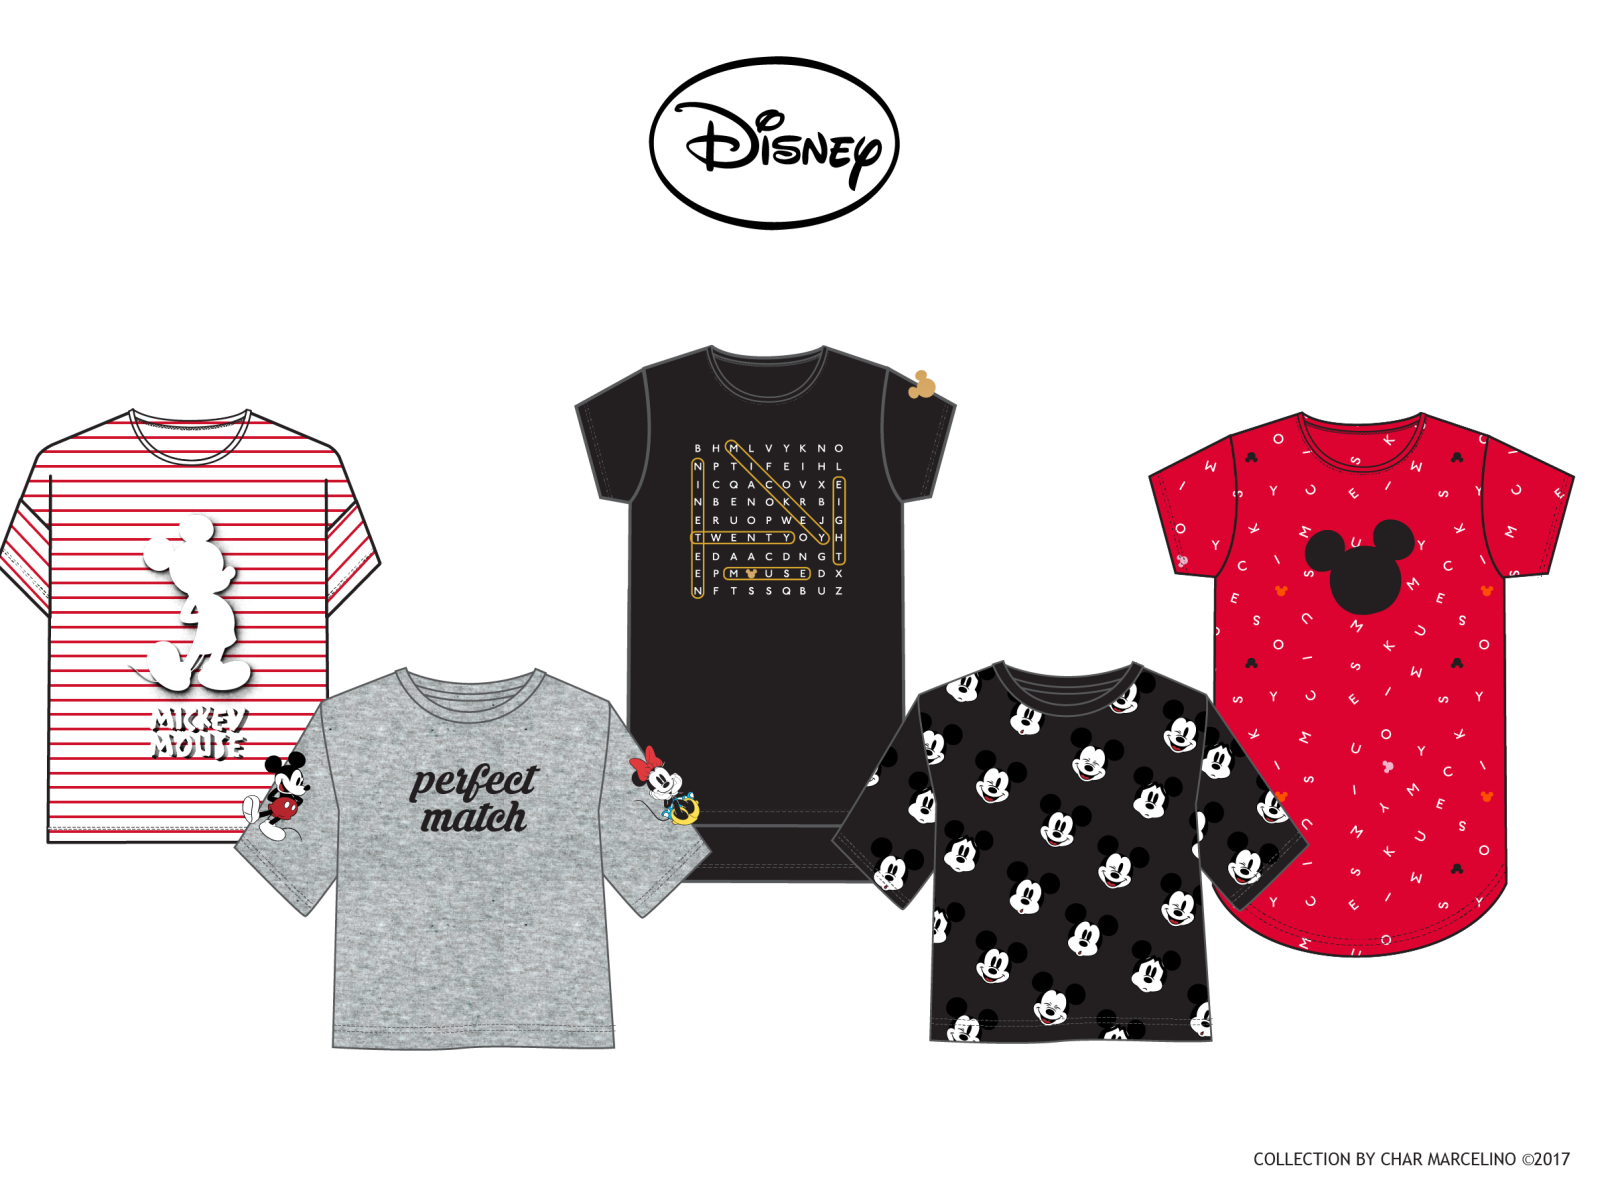 Mickey and Minnie by Charleene Marcelino on Dribbble